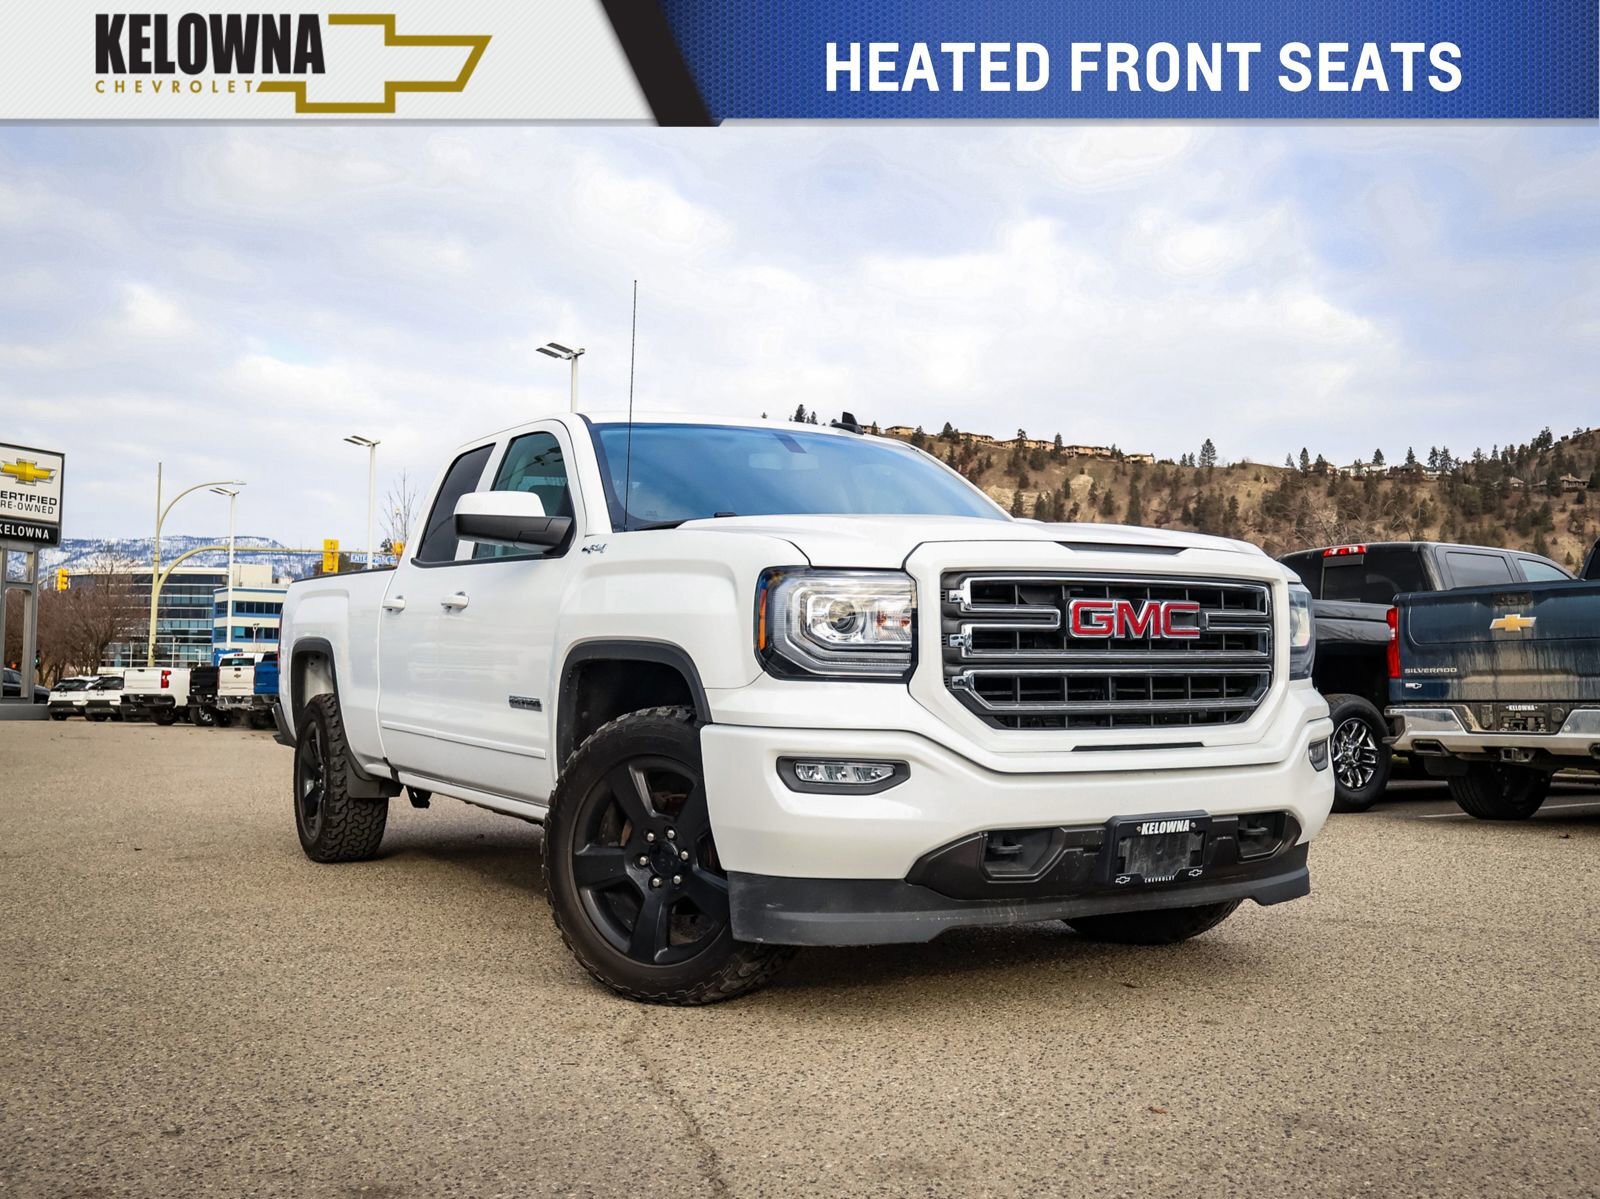 2018 GMC Sierra 1500 Extended Cab 5.3L 4WD